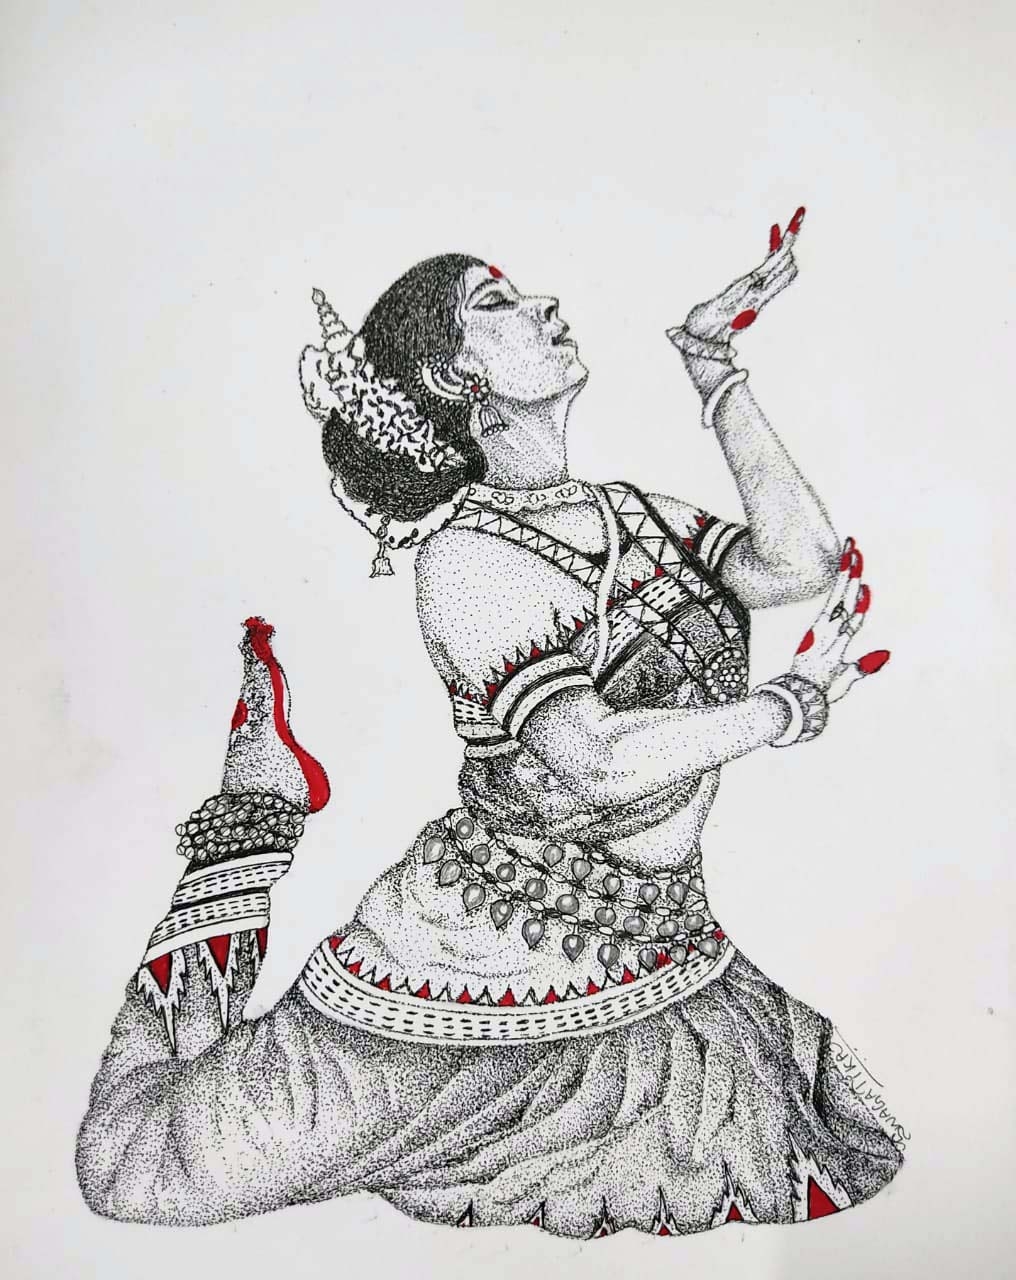 Buy Odissi Dance Handmade Painting by SURYA DAS. Code:ART_3389_57481 -  Paintings for Sale online in India.